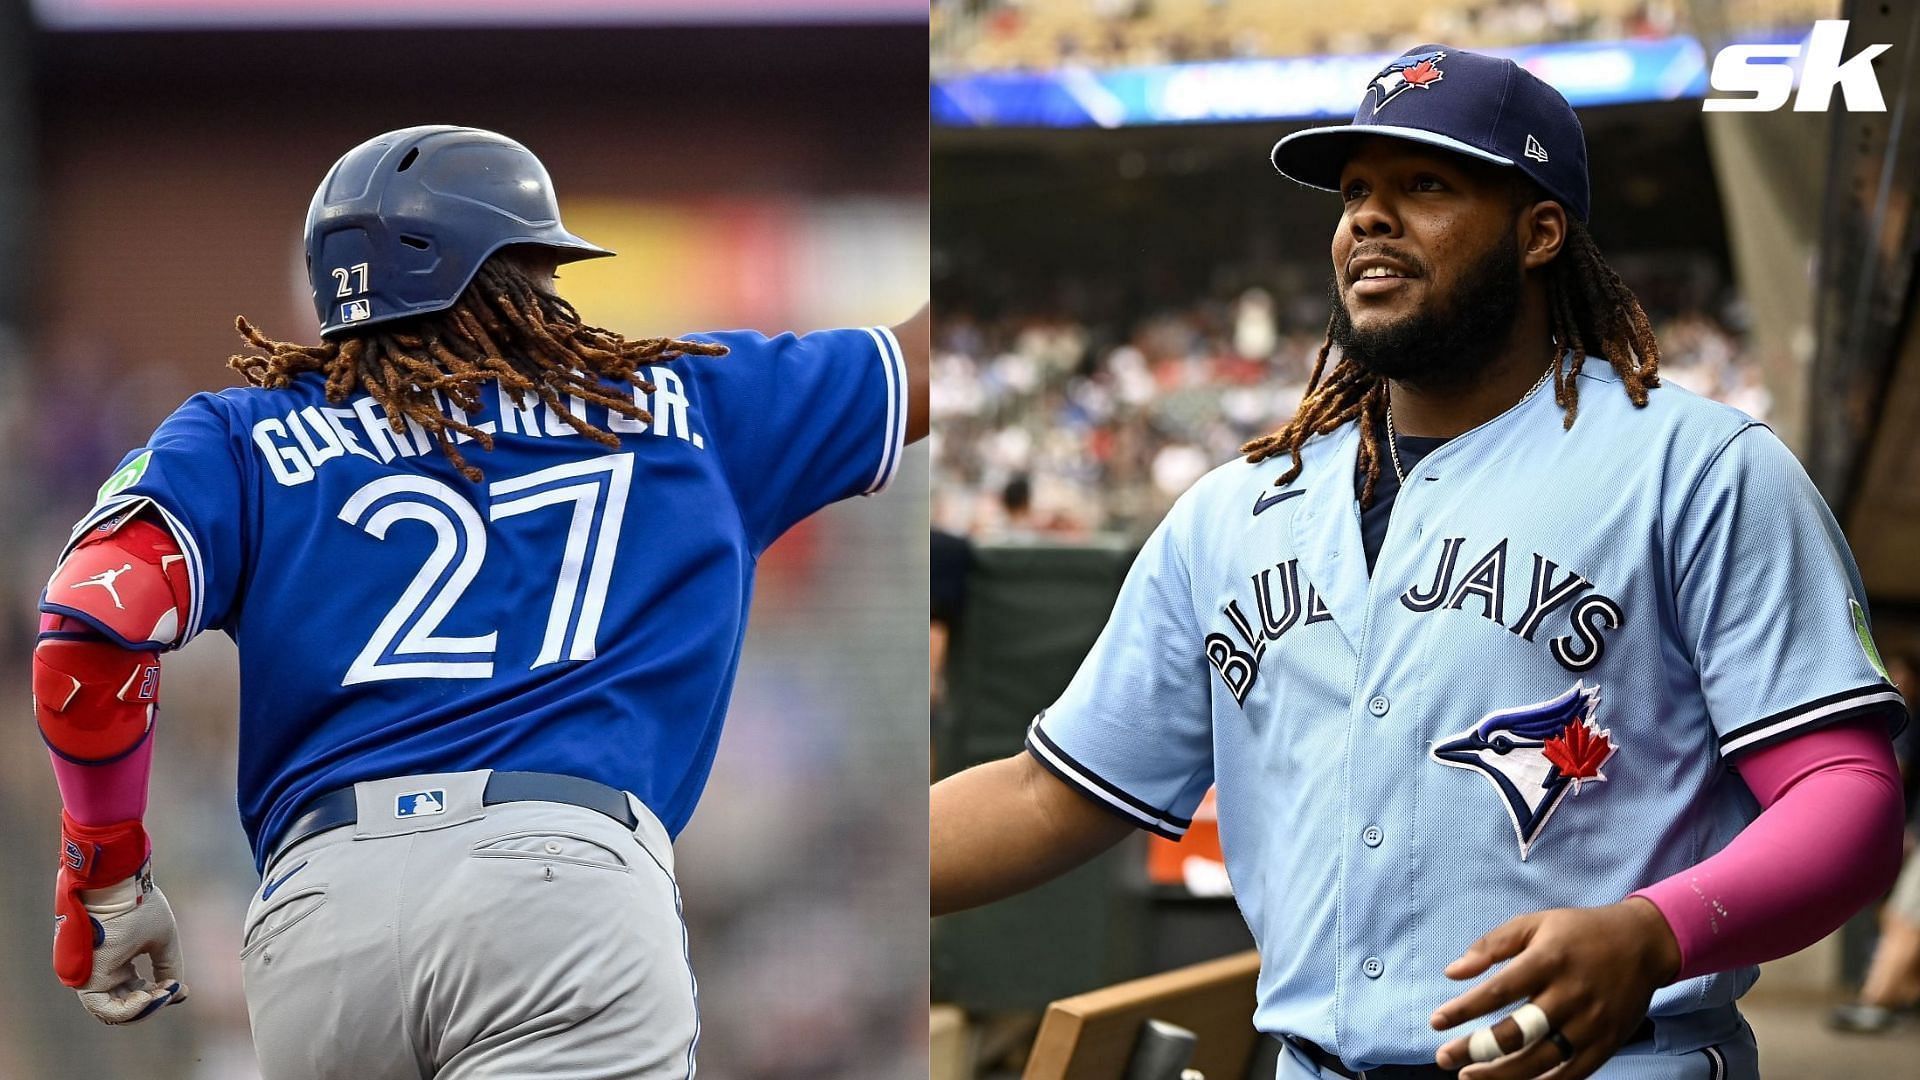 Blue Jays fans are pumped as Vladimir Guerrero Jr. helps power Toronto to their first victory of the year